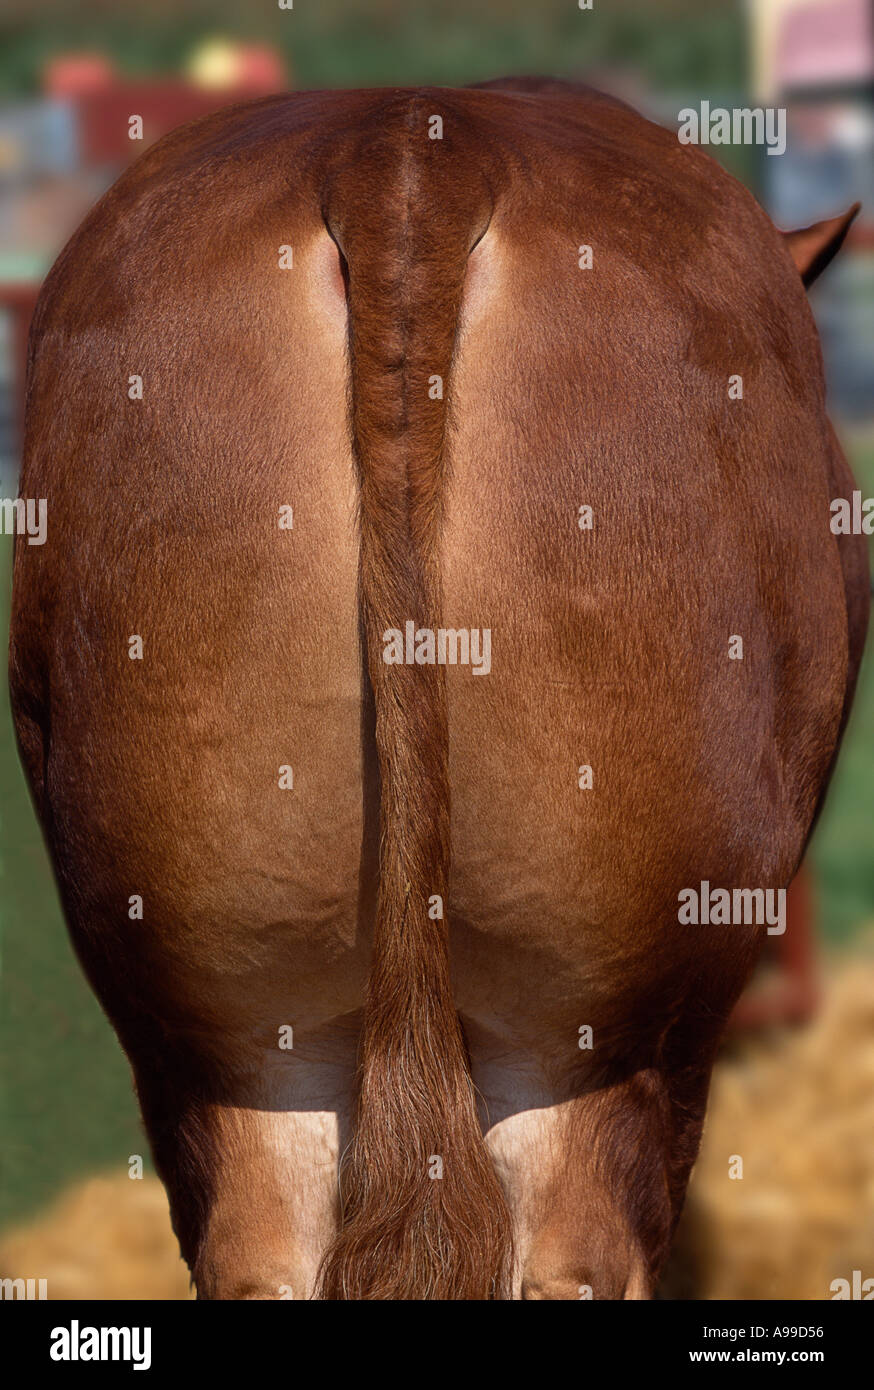 BULL'S HECK/HIND QUARTERS UND TAIL IN AGRARMESSE UK Stockfoto